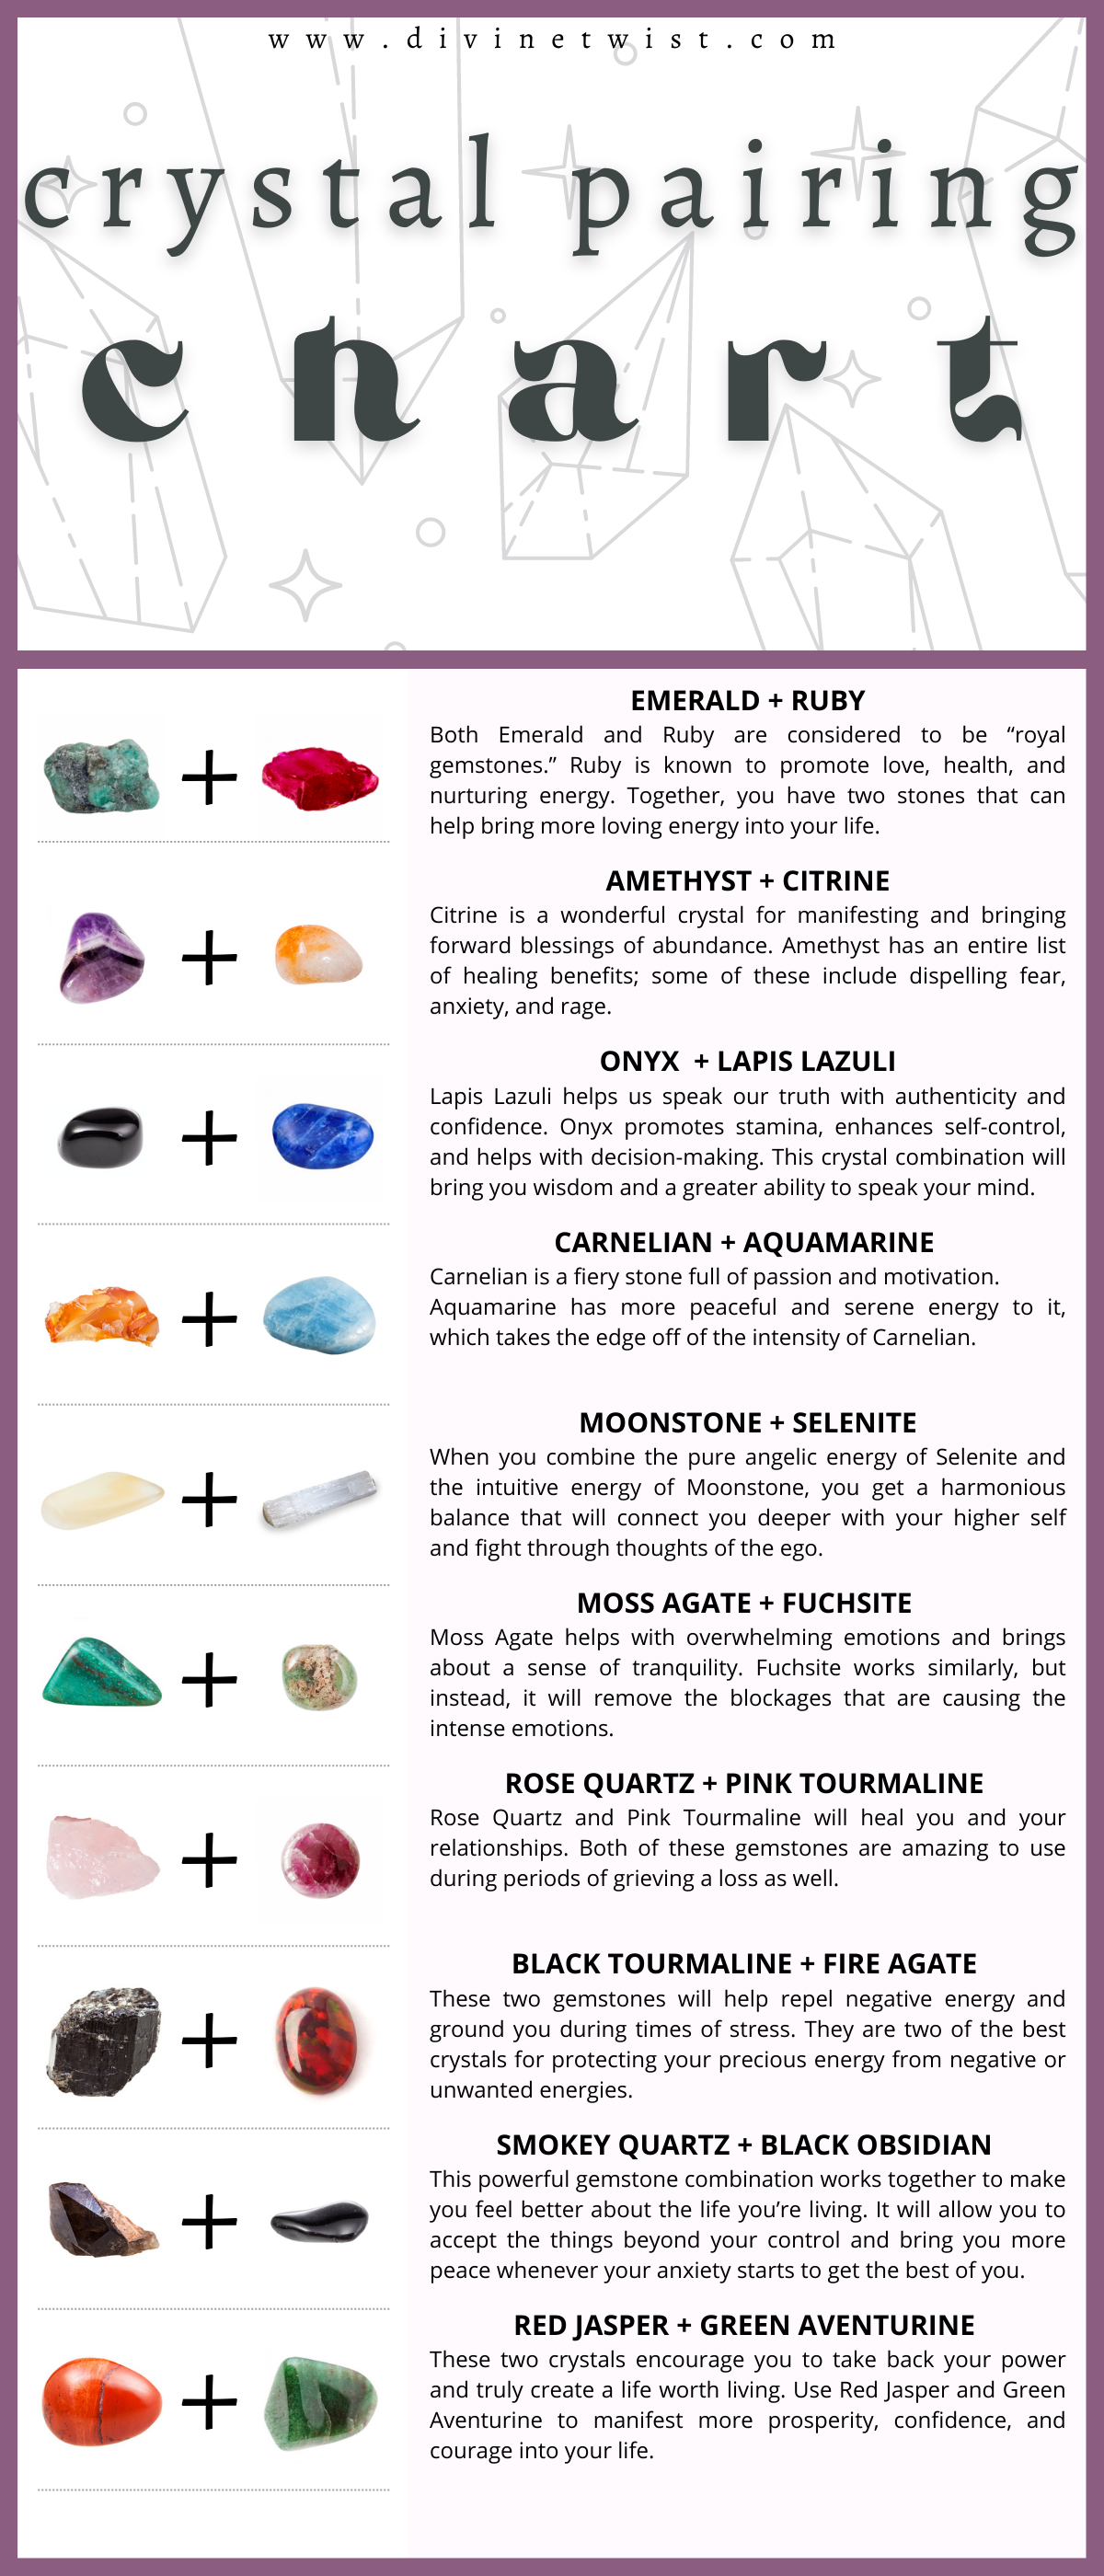 Crystal pairing chart with 10 combinations.